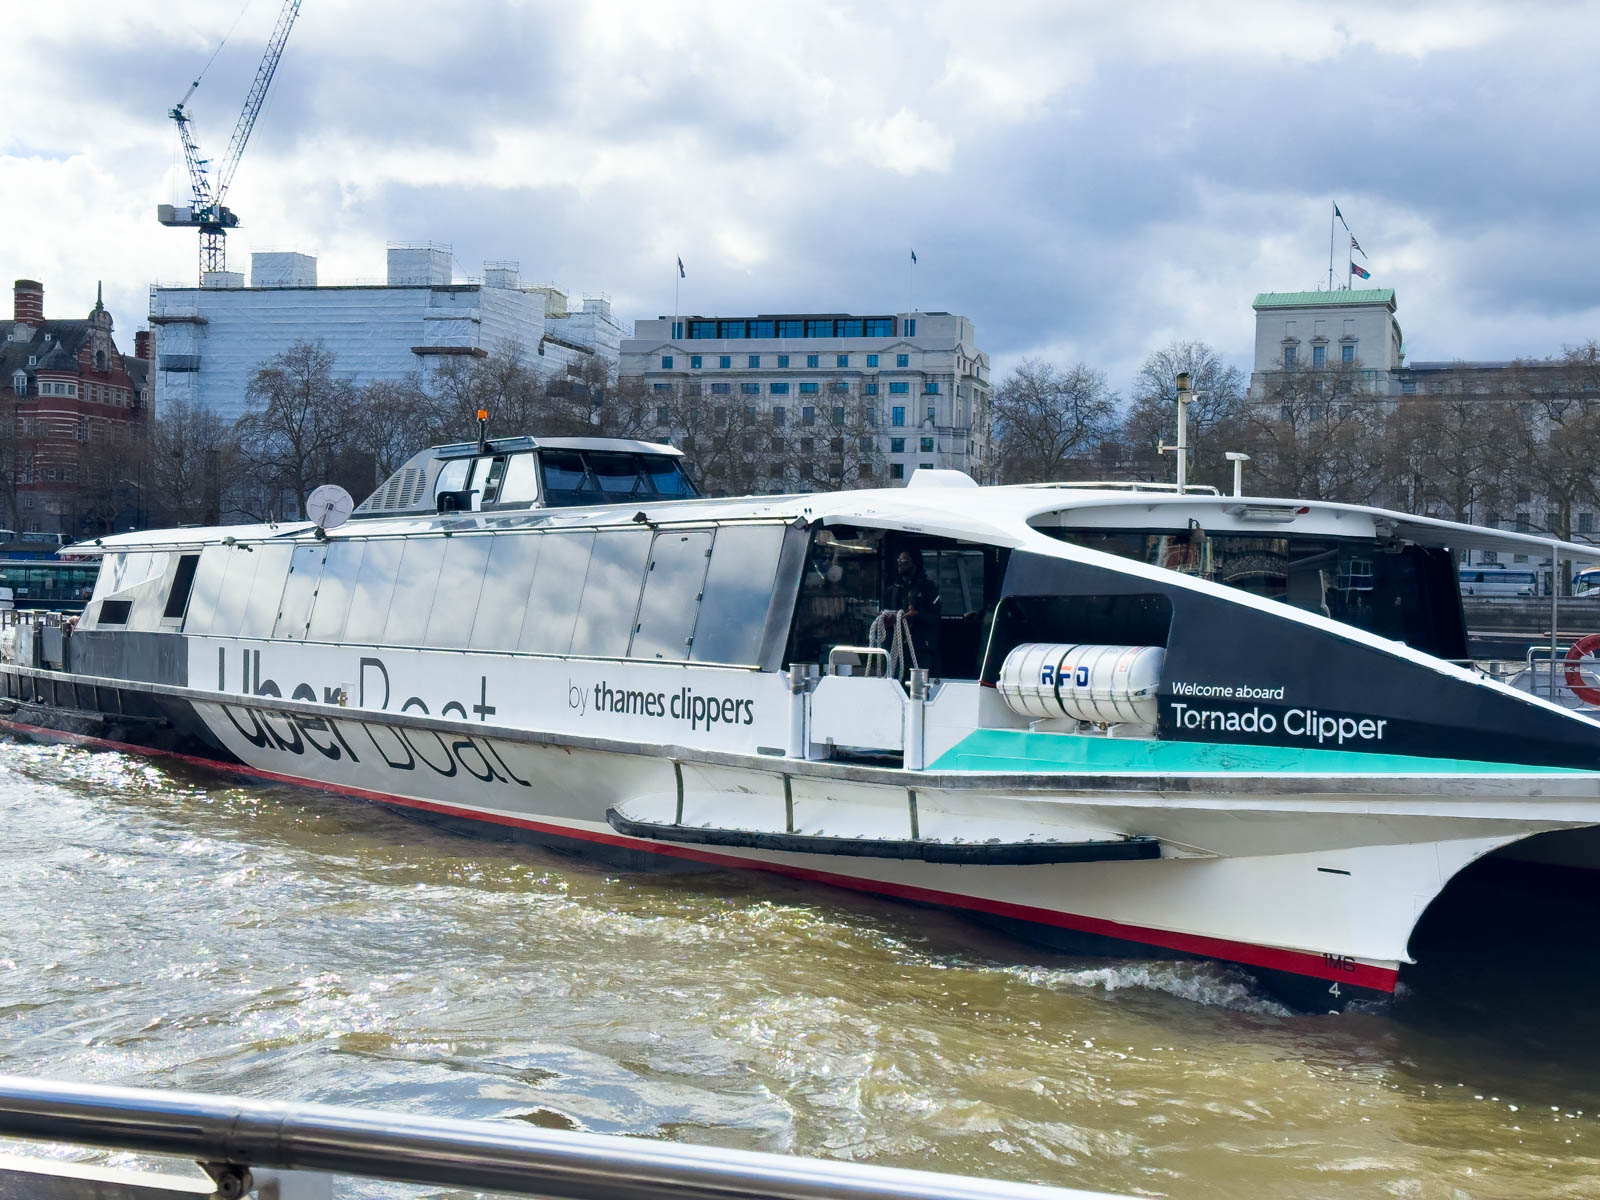 An Uber Boat on the Thames river in London.